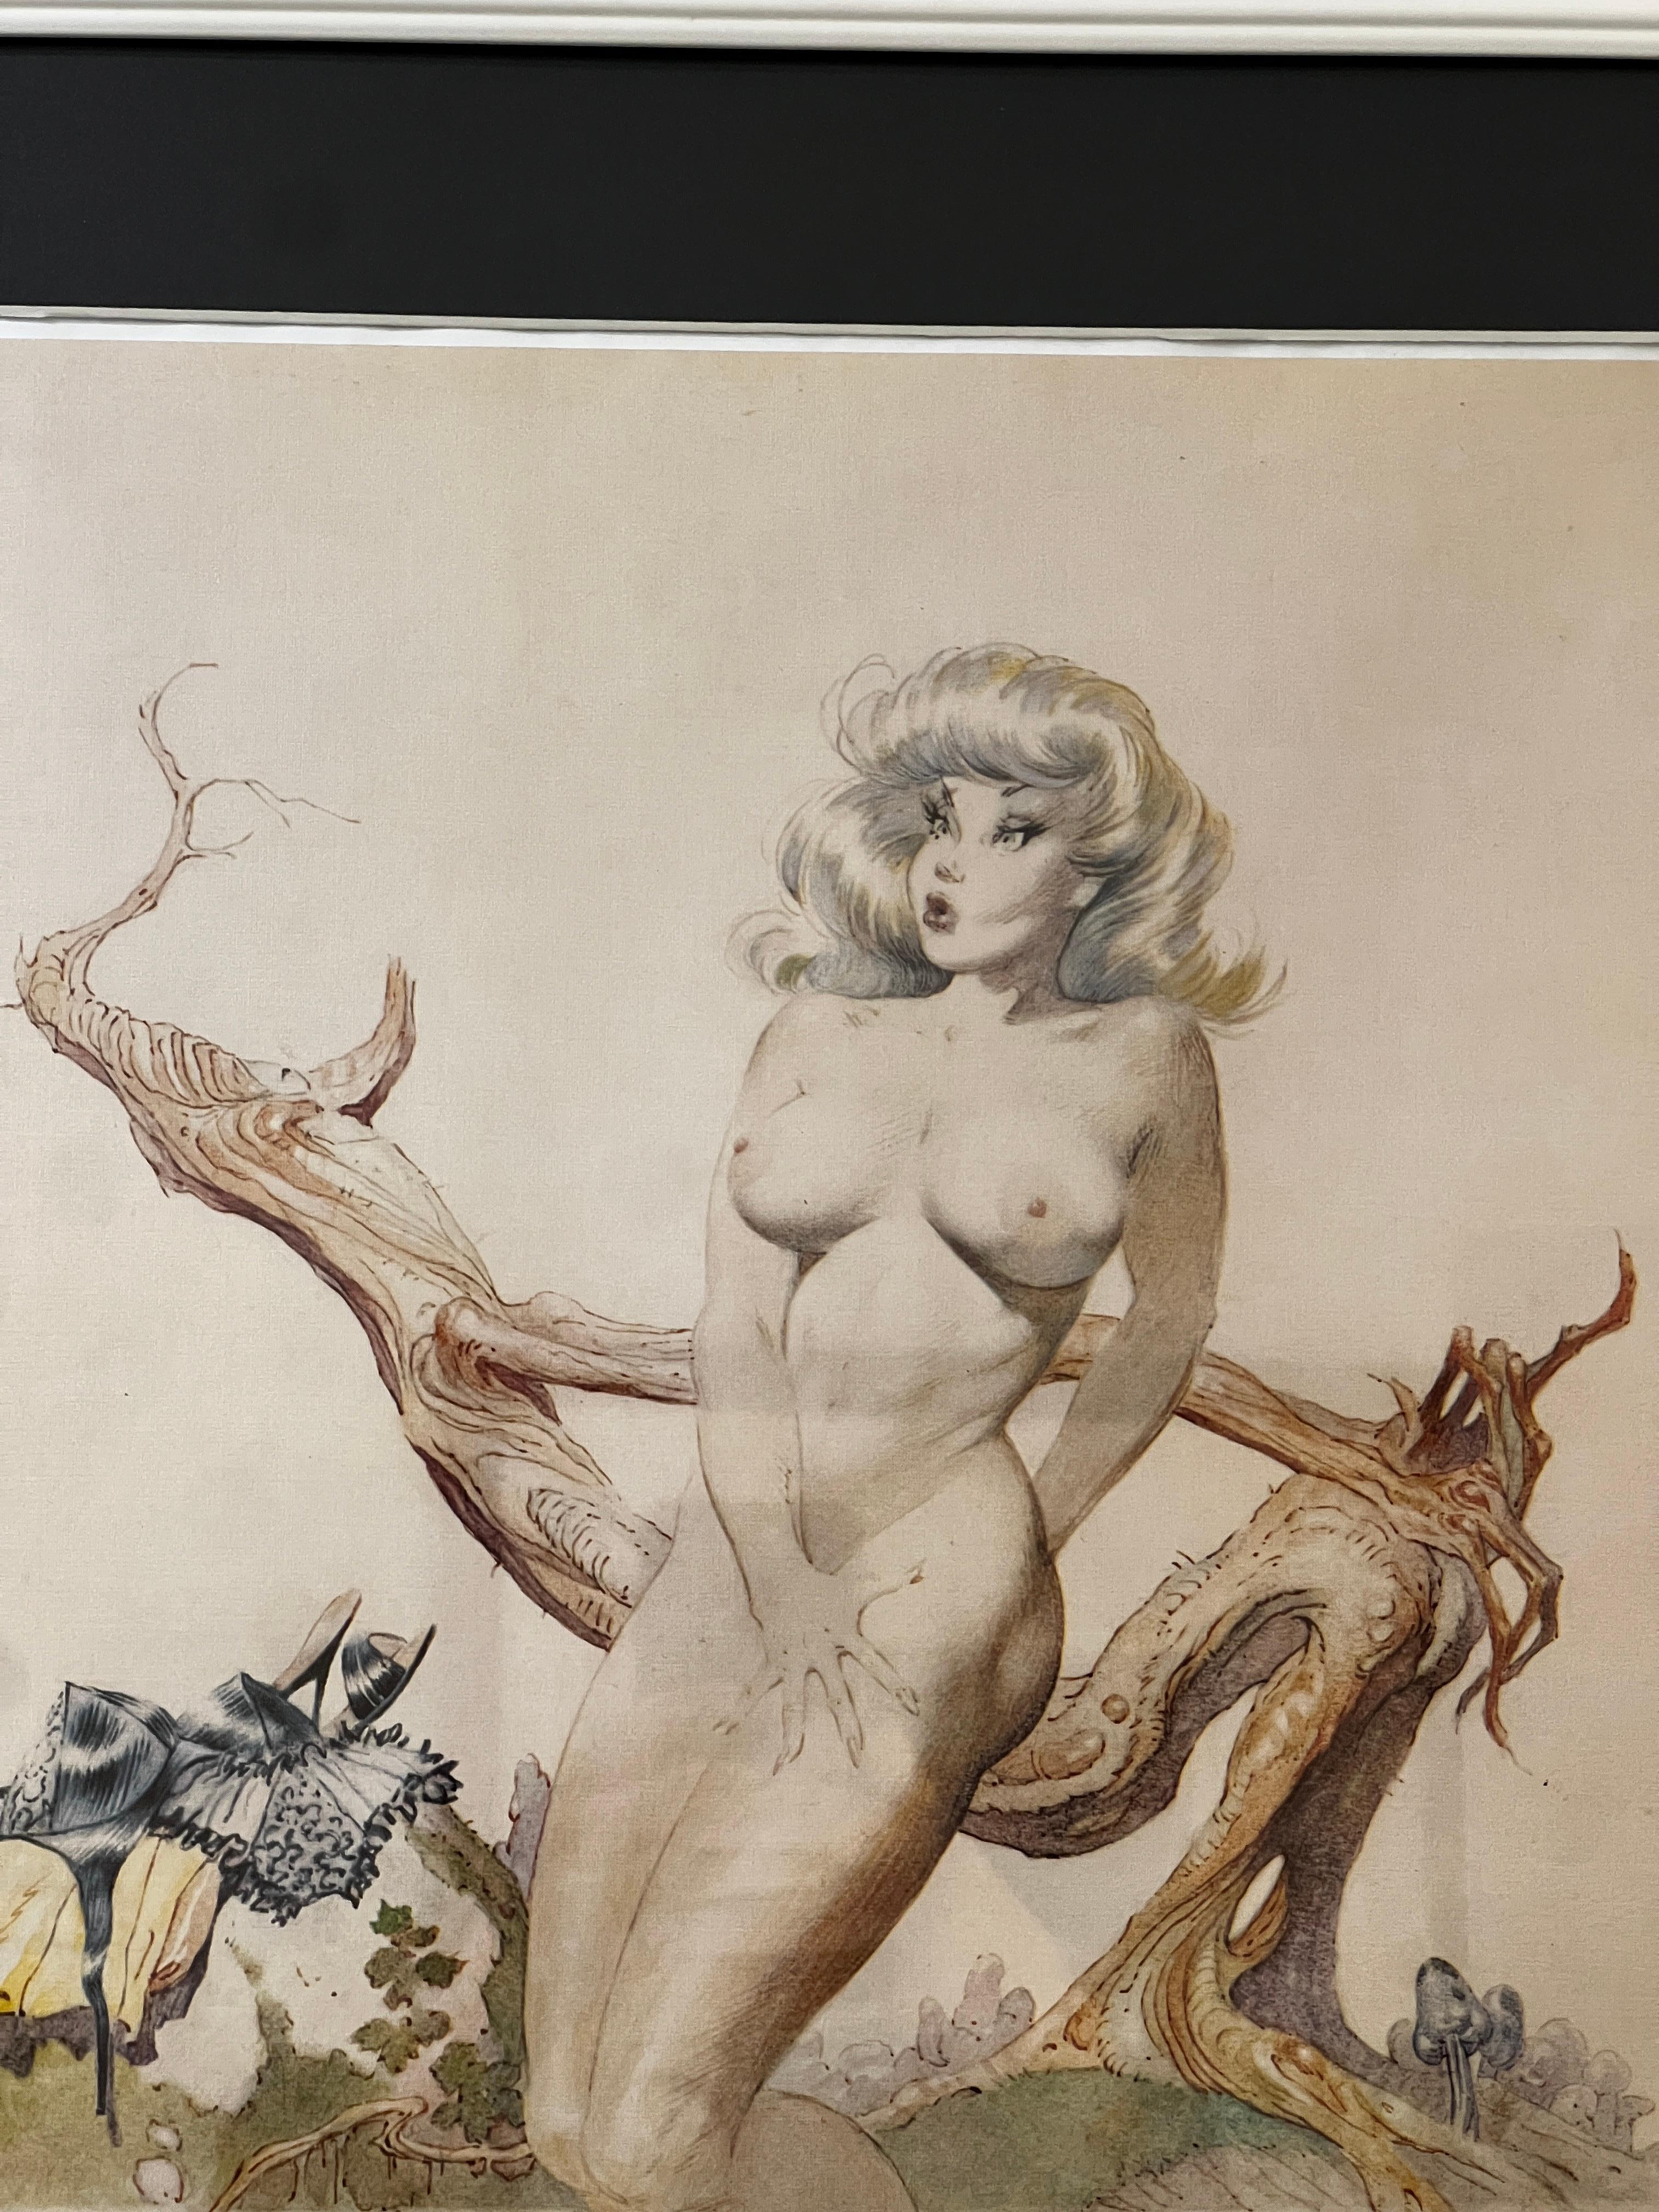 Bathing Girl Print by Frank Frazetta (Vintage) In Good Condition For Sale In West Hollywood, CA